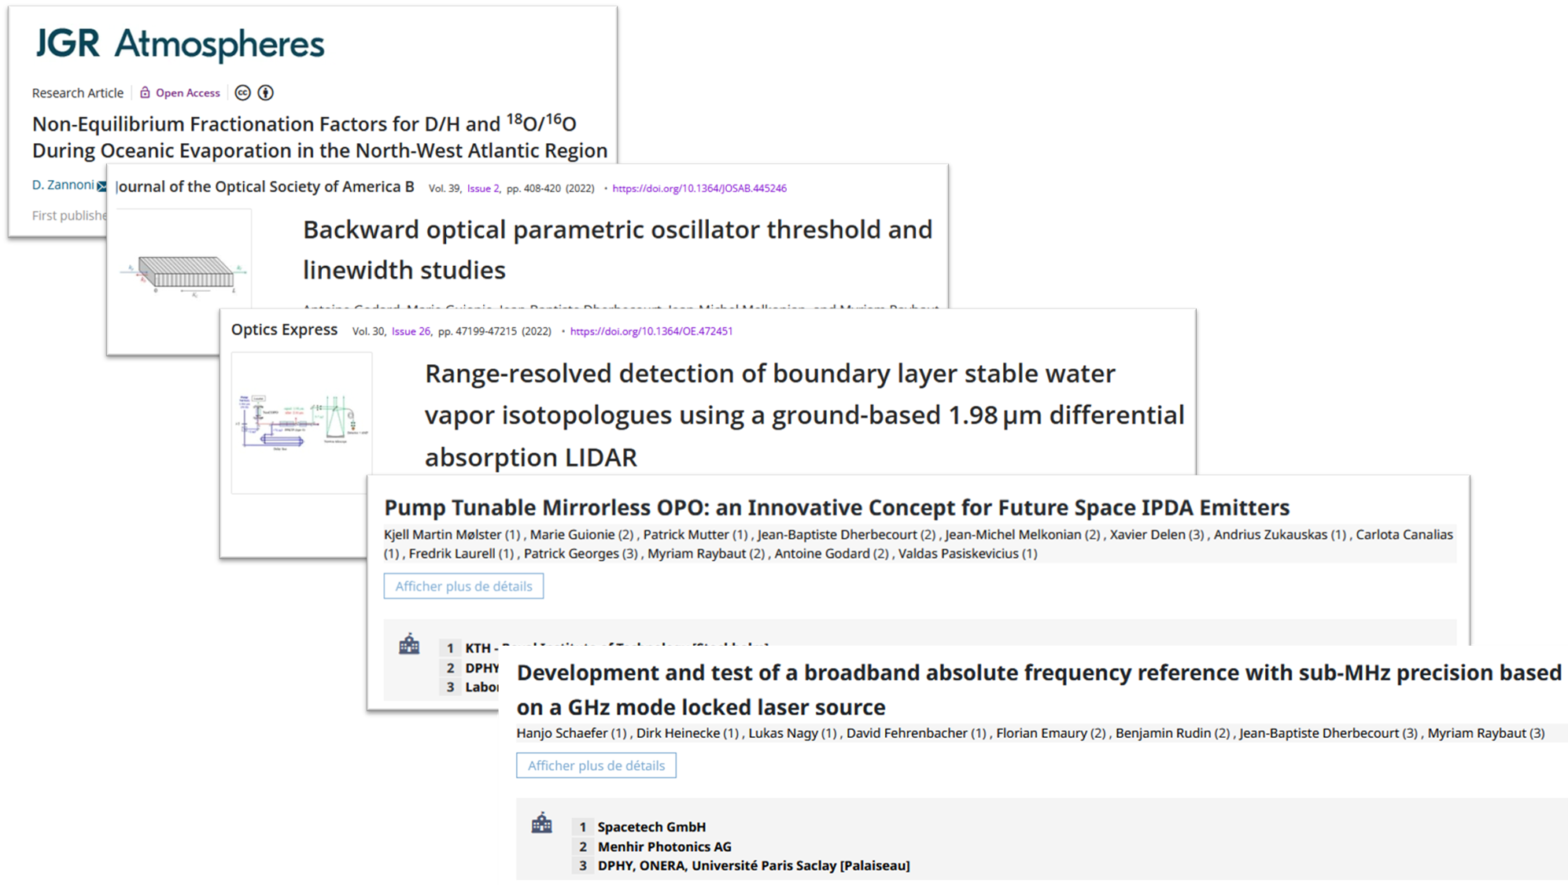 LEMON peer-reviewed papers published in 2022-2023 and available in Open Access